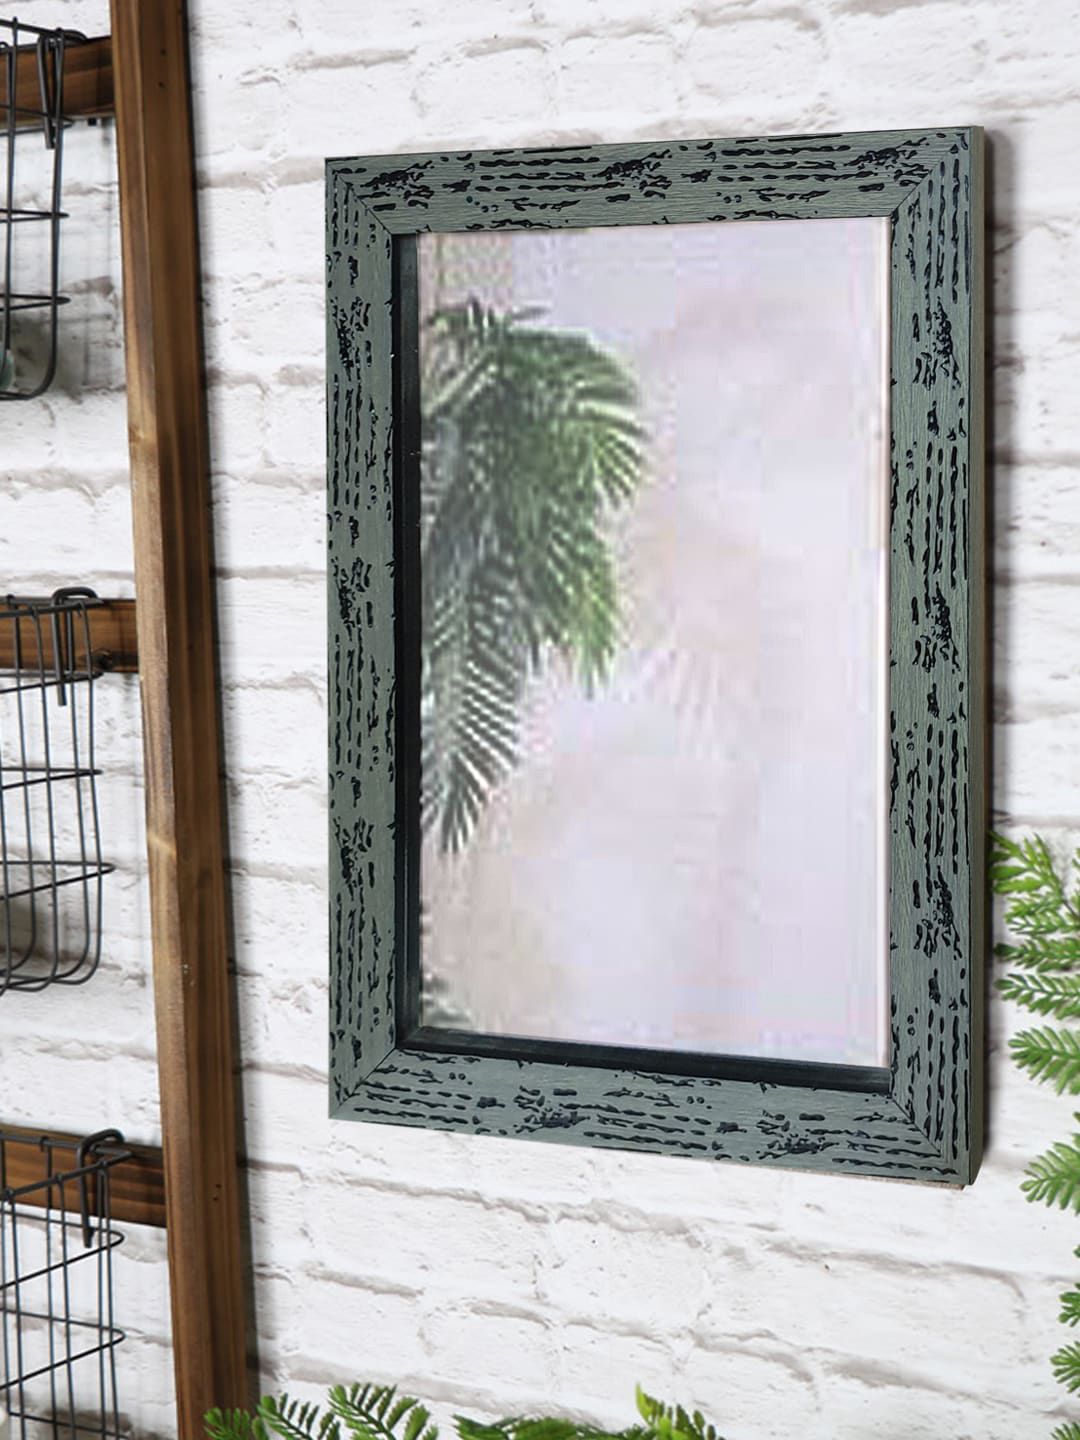 Gallery99 Green & Transparent Textured Mirrors Price in India